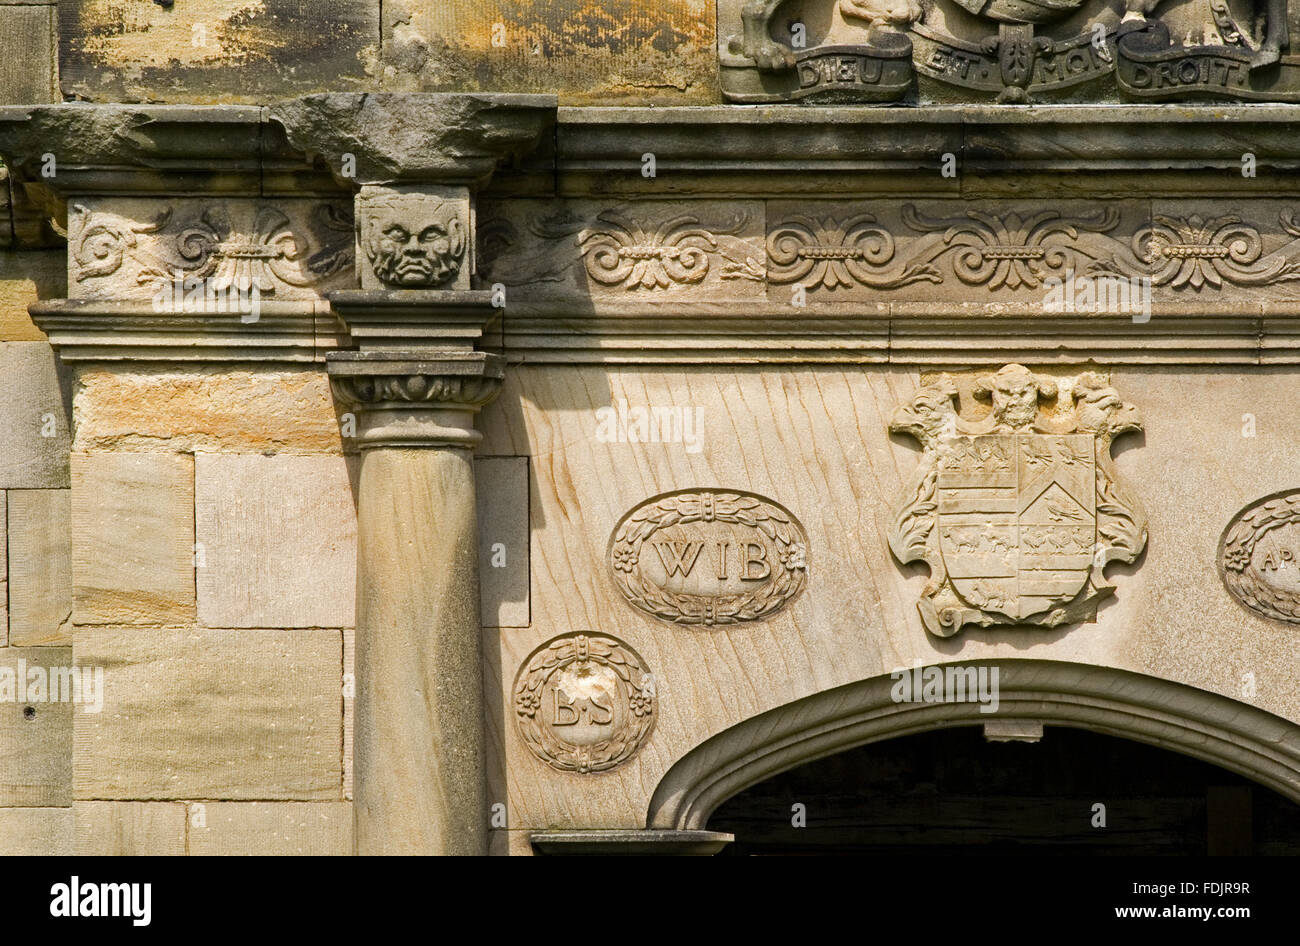 Close view of architectural detail on the facade of Gibside Hall, Newcastle upon Tyne. The house was built between 1603 and 1620, with alterations in both the 18th and 19th centuries. Stock Photo